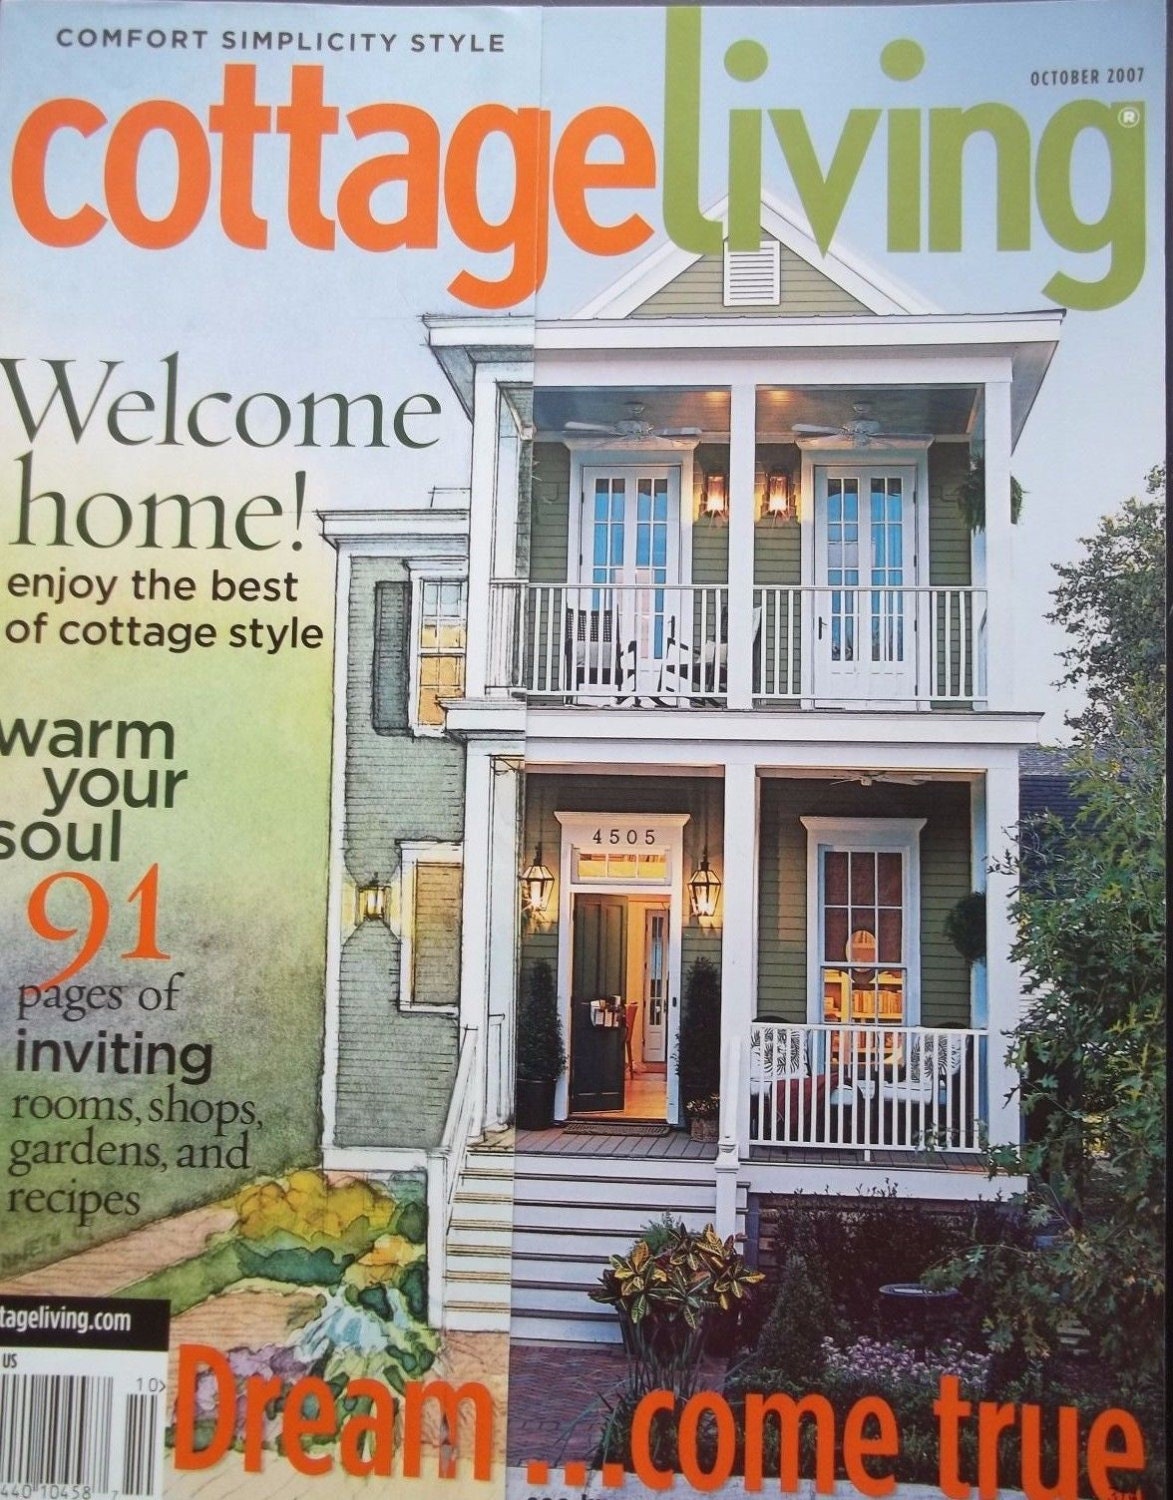 Cottage Living Magazine Dream...Come True October by 5girls09